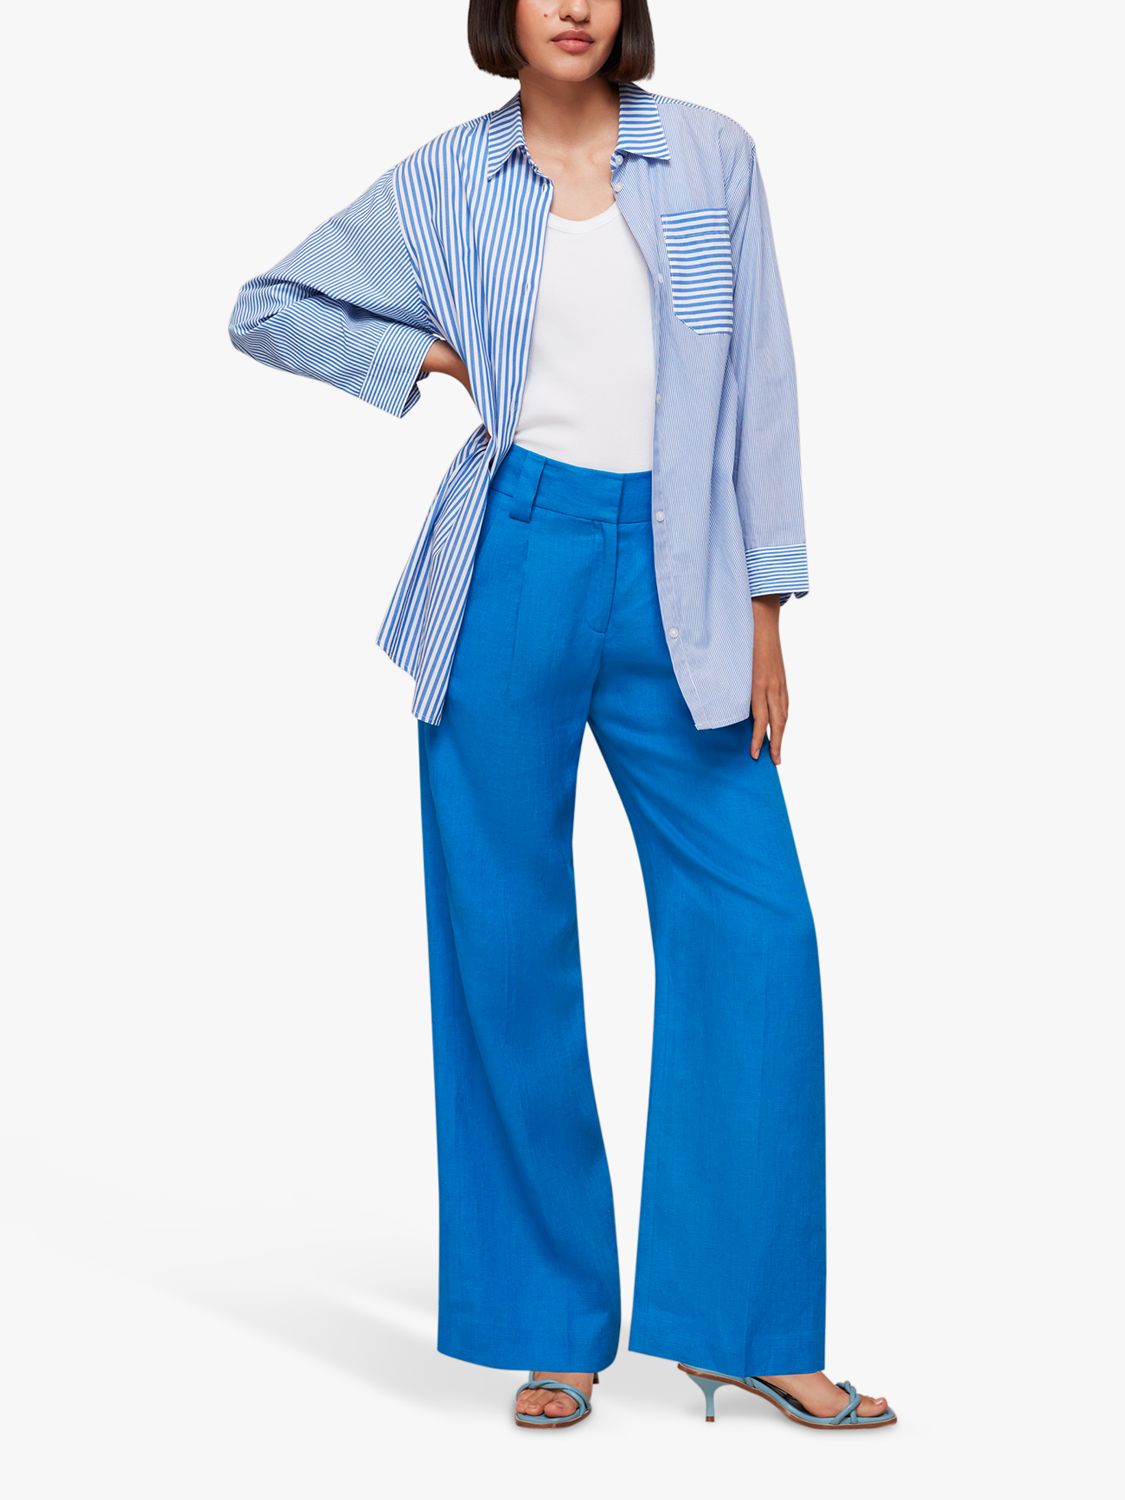 Whistles Leonie Tailored Linen Trousers, Blue at John Lewis & Partners